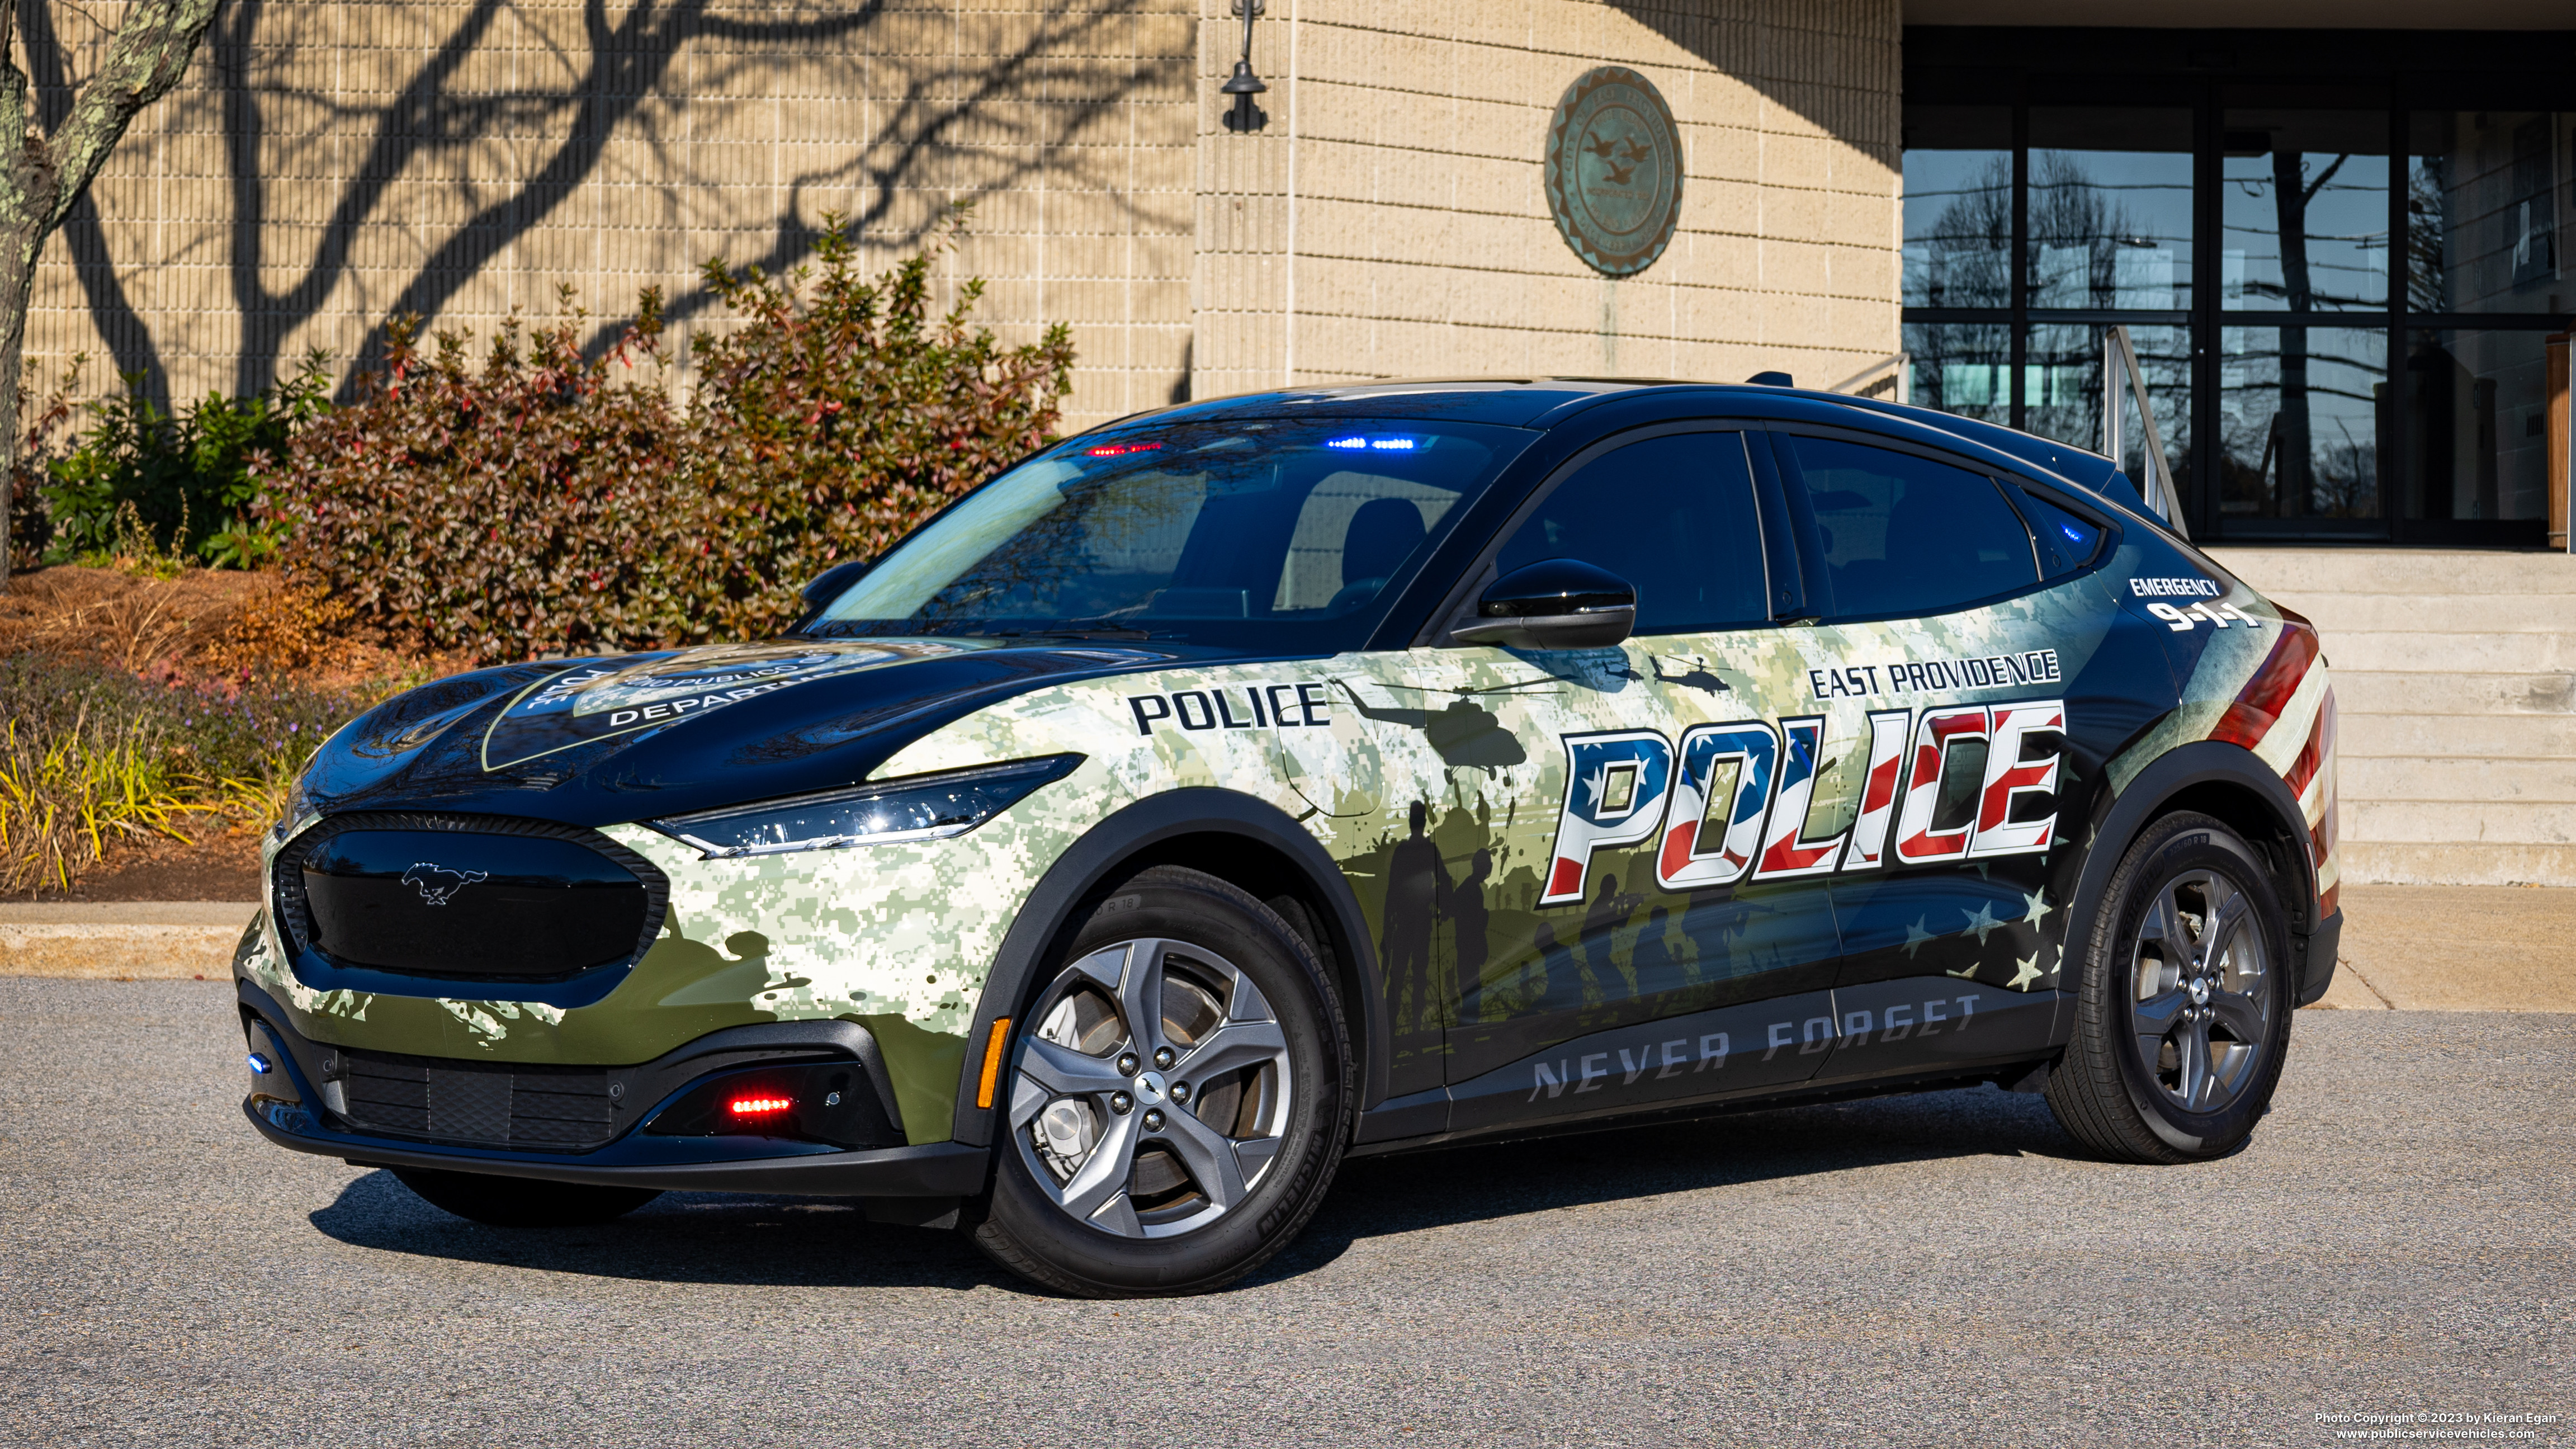 A photo  of East Providence Police
            Veteran's Unit, a 2022 Ford Mustang Mach-E             taken by Kieran Egan